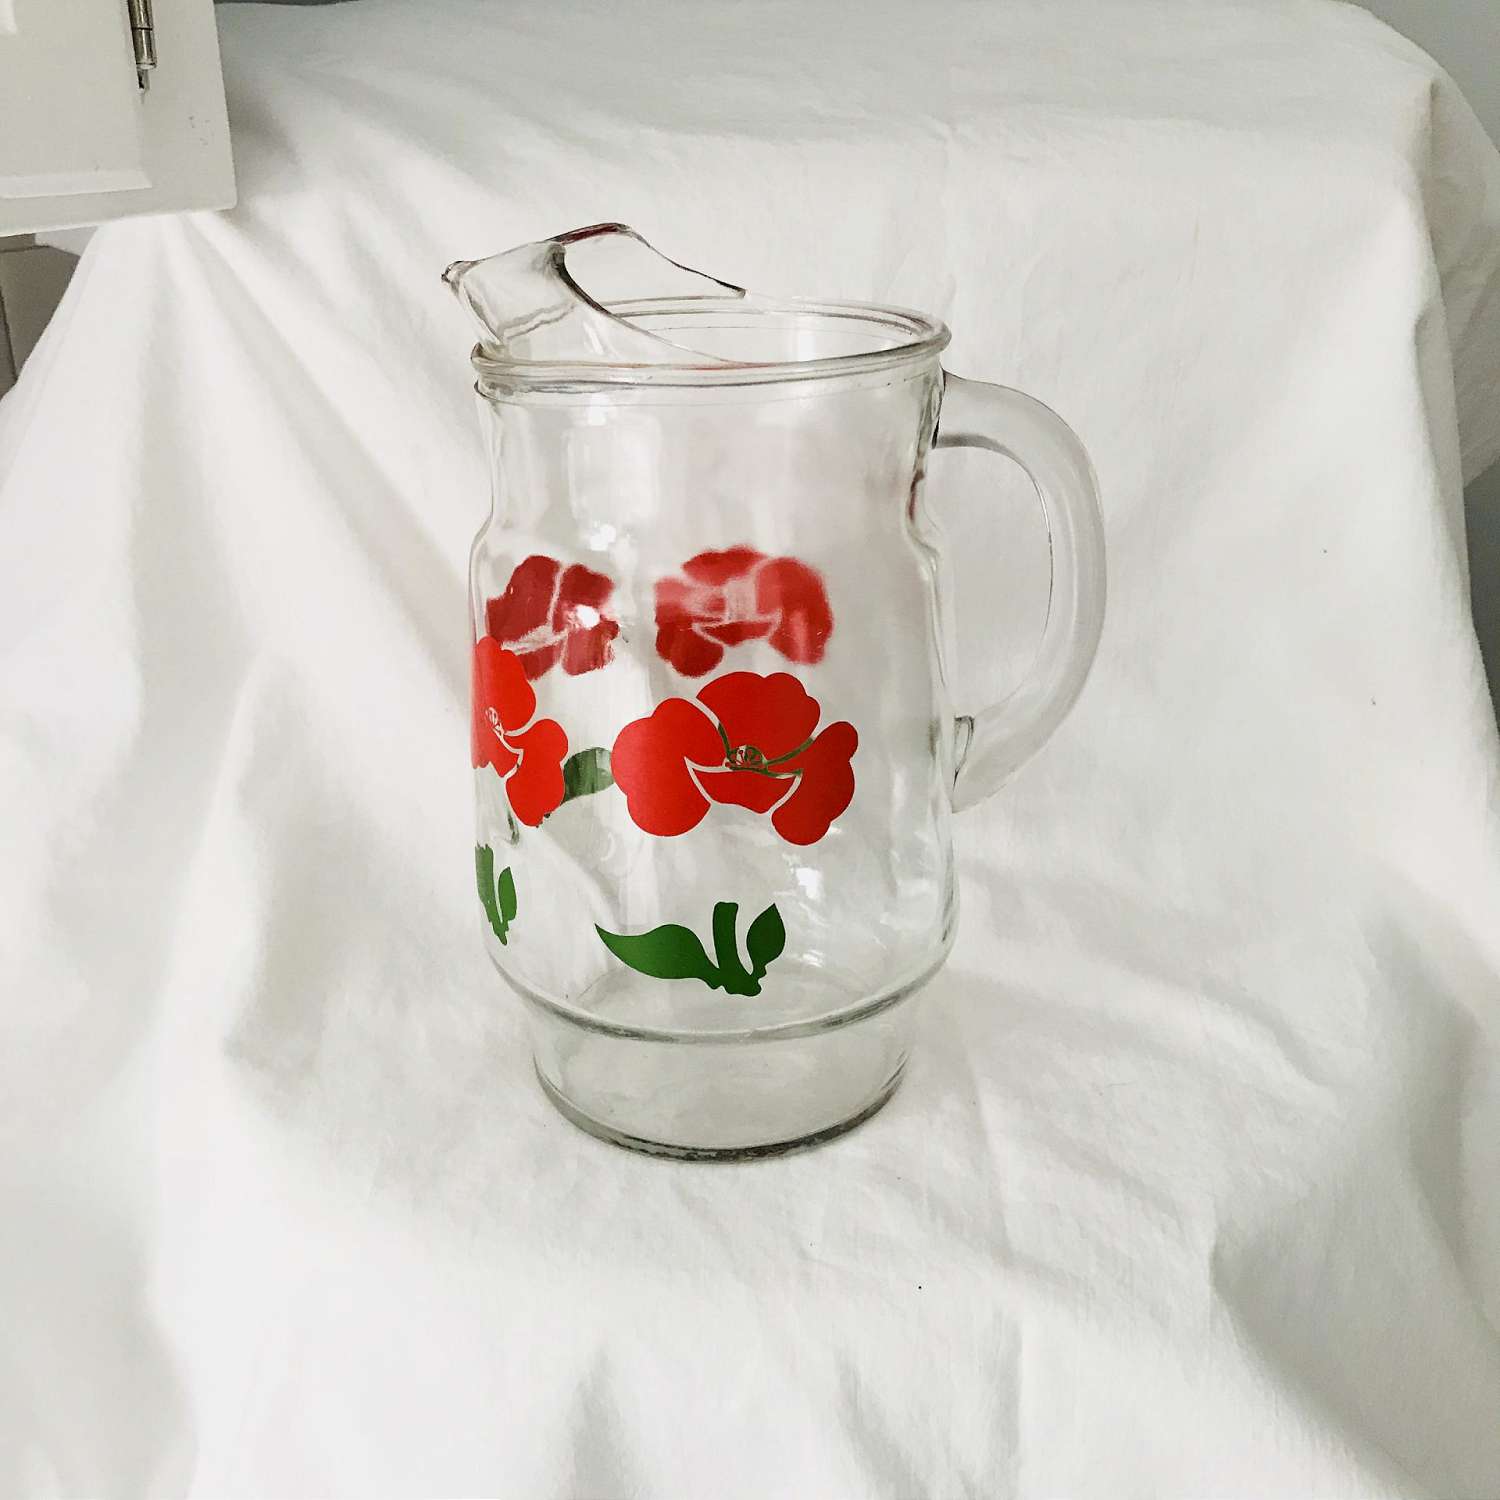 https://www.truevintageantiques.com/wp-content/uploads/2019/12/vintage-pitcher-glass-fired-on-paint-red-flowers-iced-tea-koolaid-collectible-retro-kitchen-display-farmhouse-summer-picnic-patio-water-5df9538e4-scaled.jpg